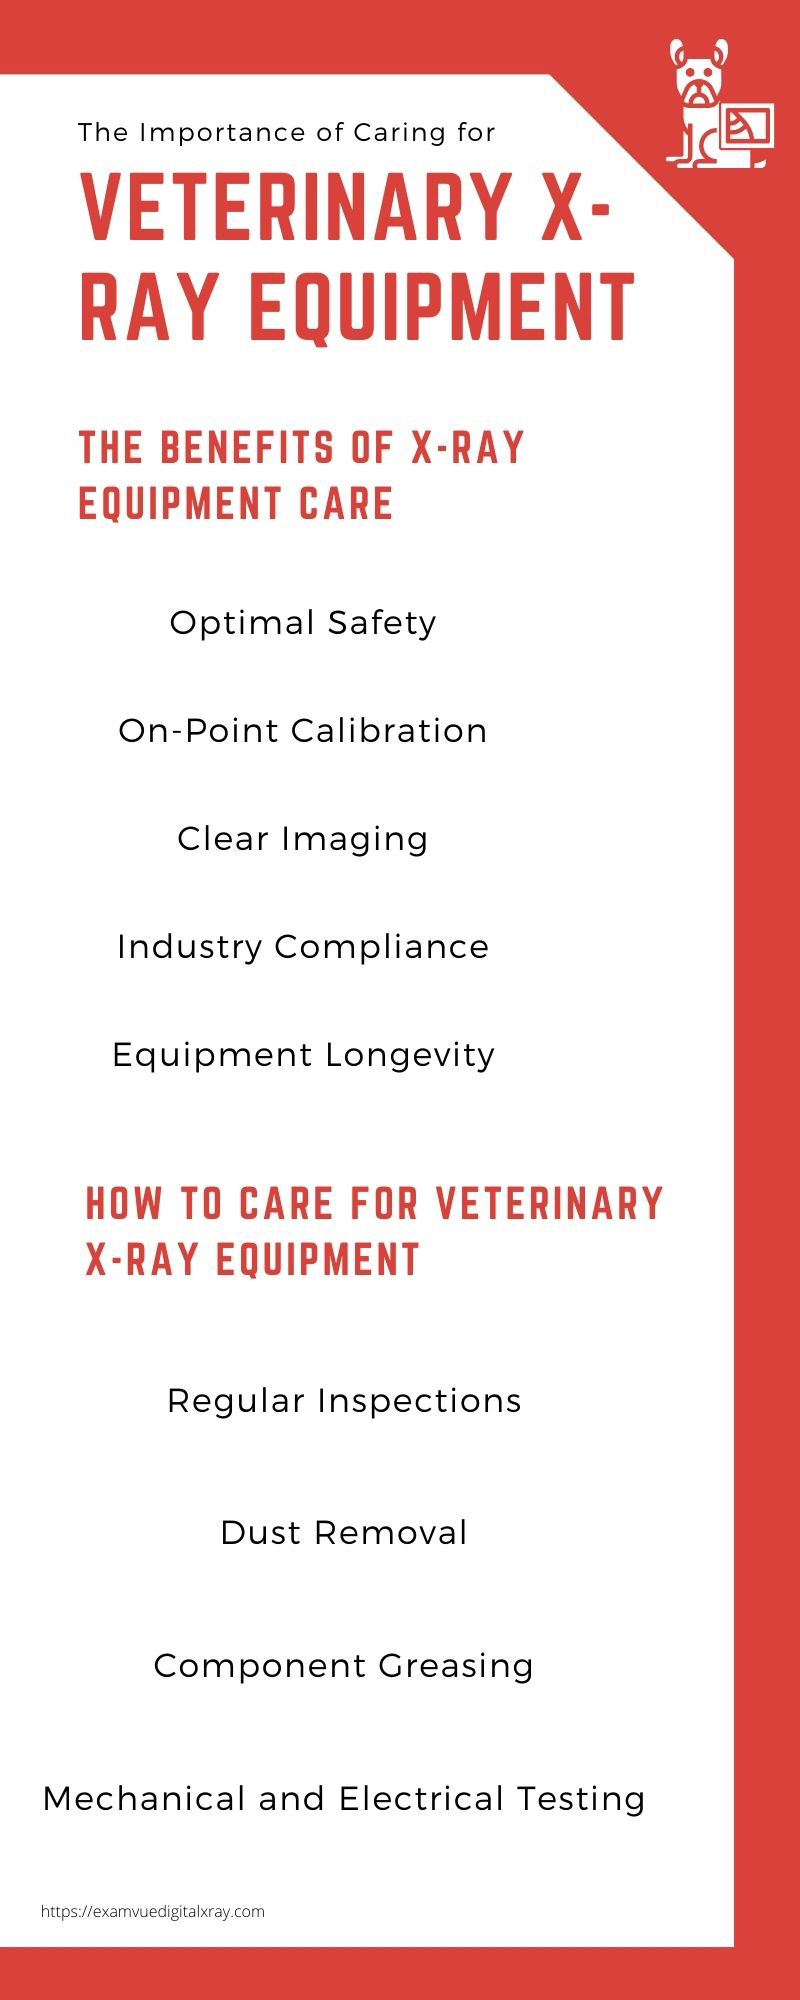 The Importance of Caring for Veterinary X-Ray Equipment
